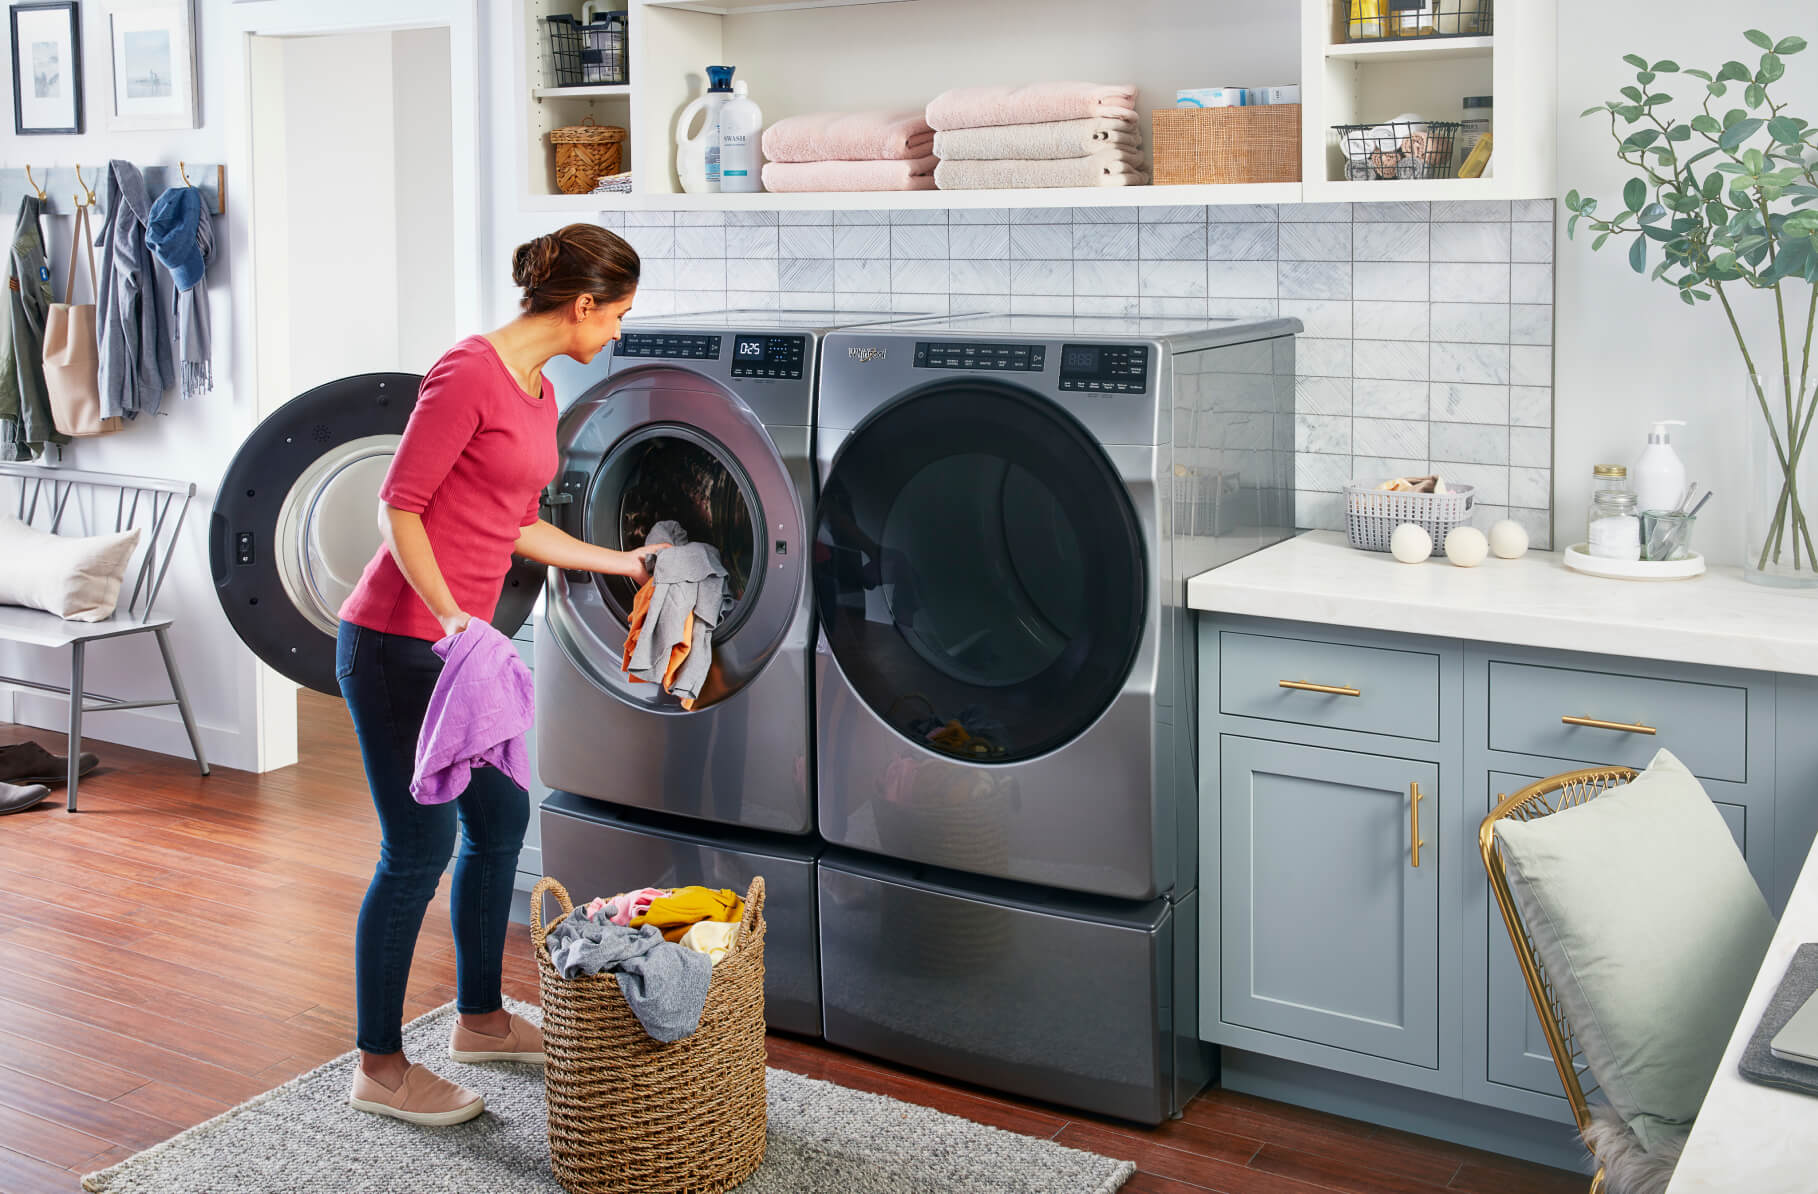 A woman loads clothes into a front-load washing machine in her laundry room.